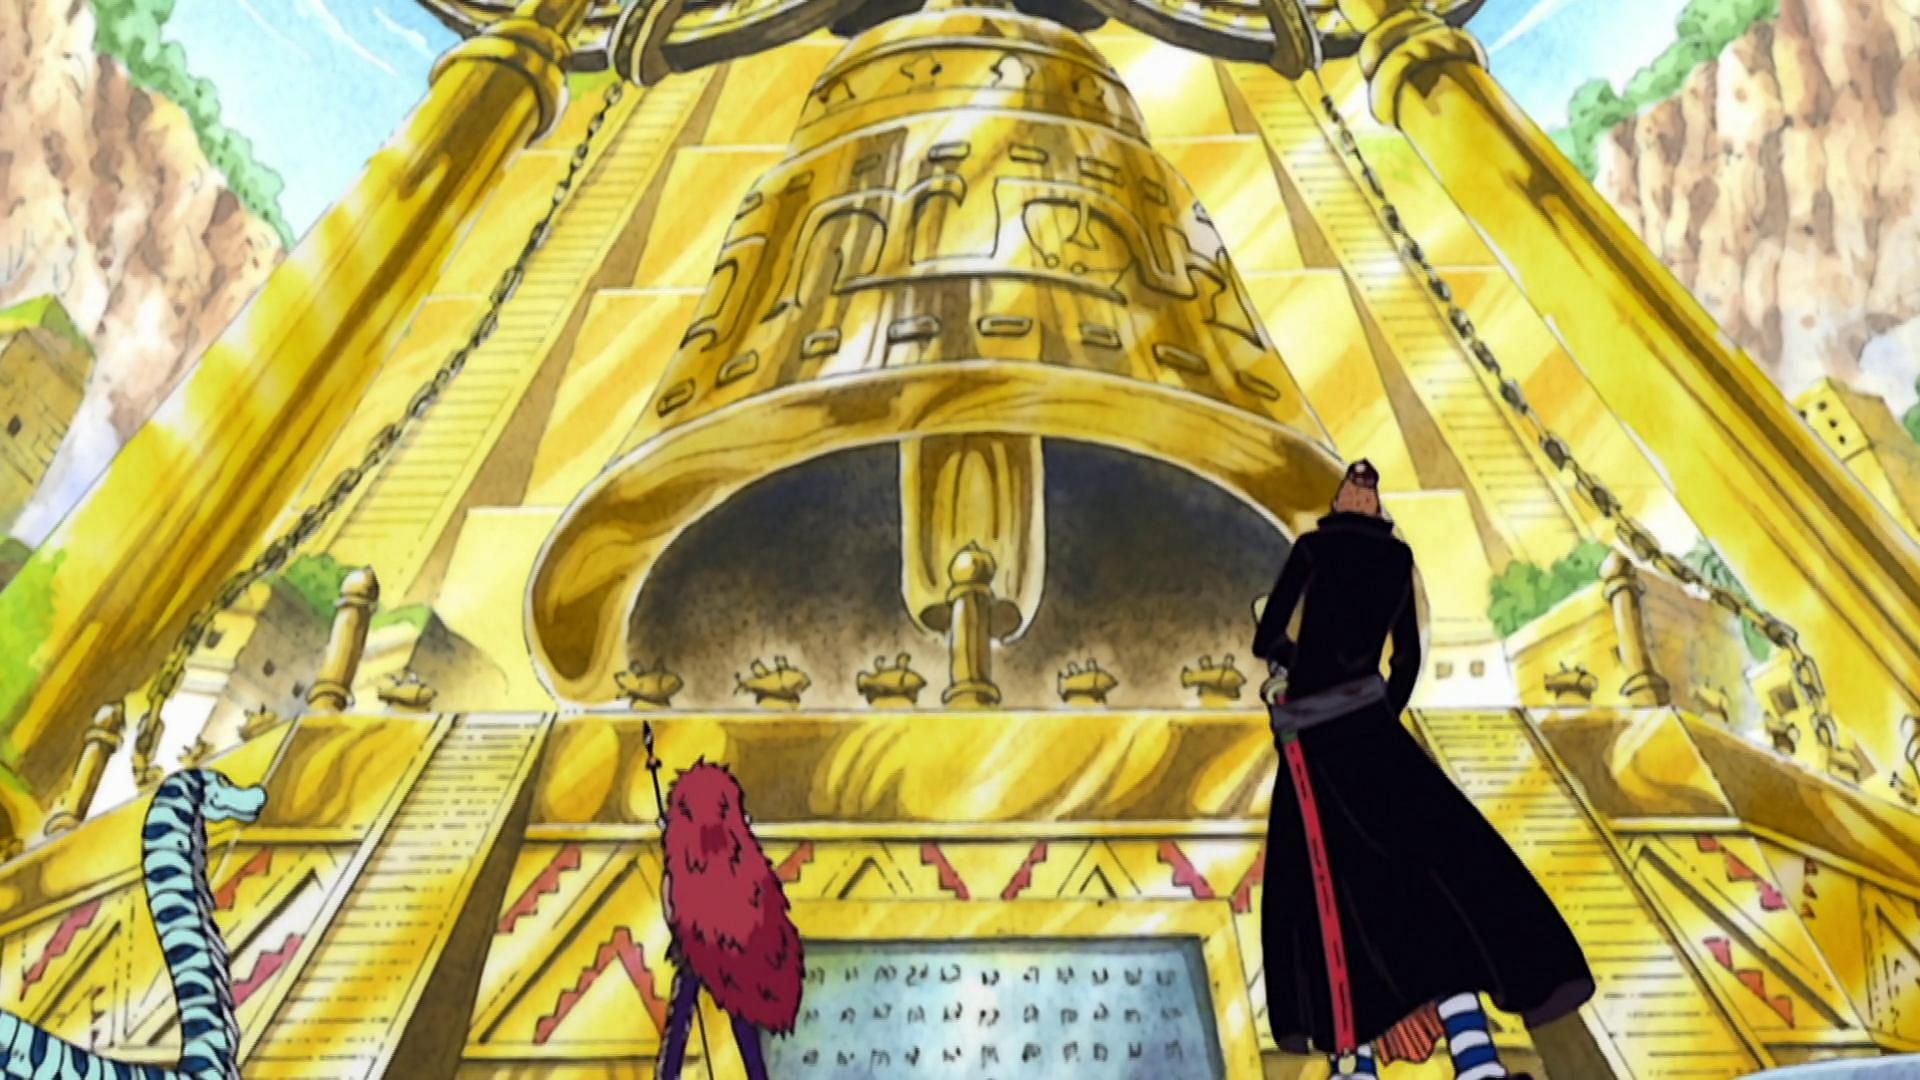 Kalgara and Noland in front of the Golden Bell of Shandora (Image via Toei Animation, One Piece)